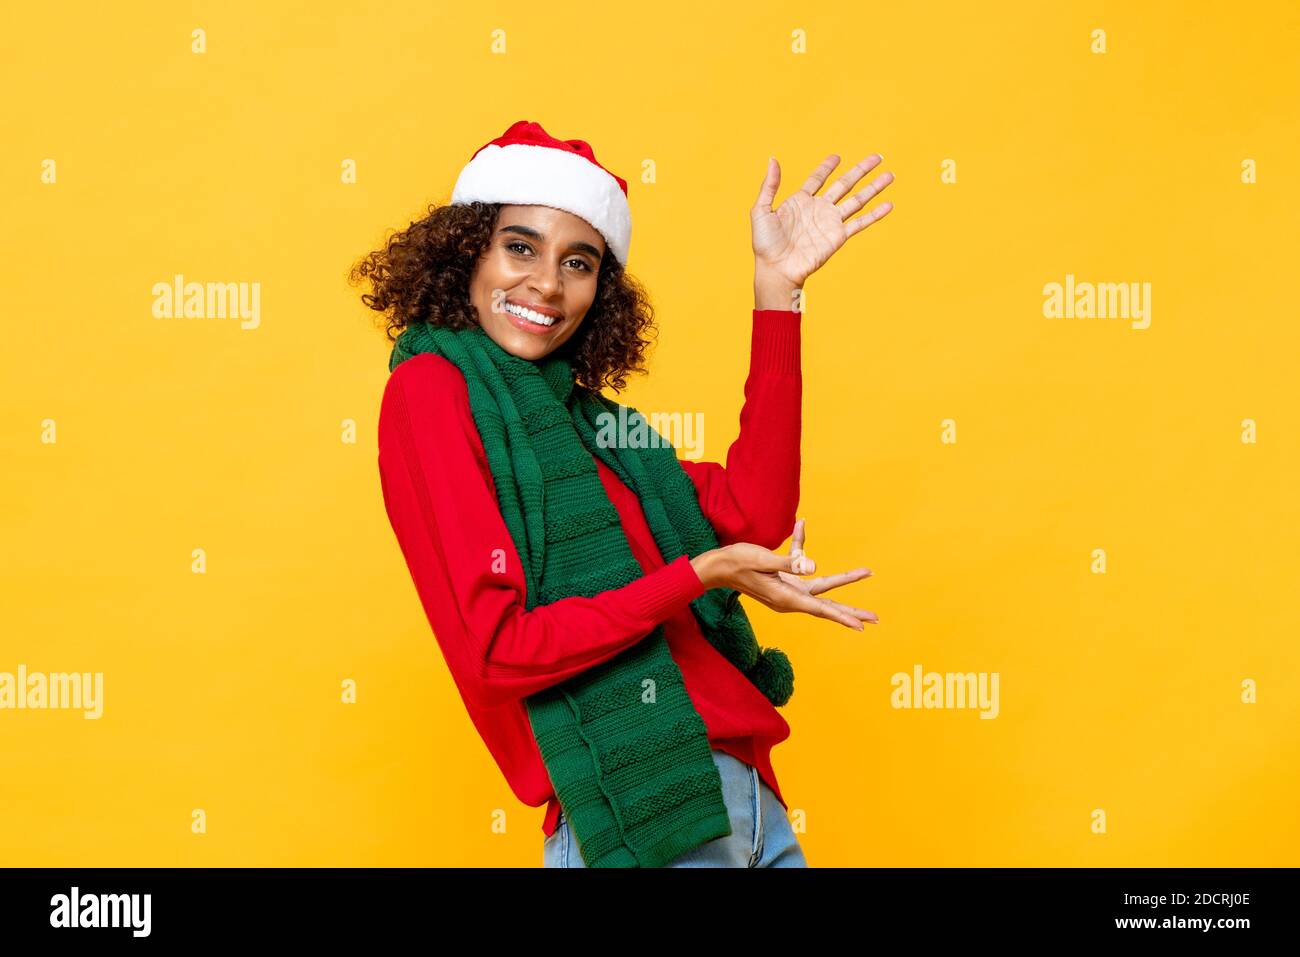 Cheerful happy woman in Christmas attire smiling and raising hands up in yellow studio isolated background Stock Photo